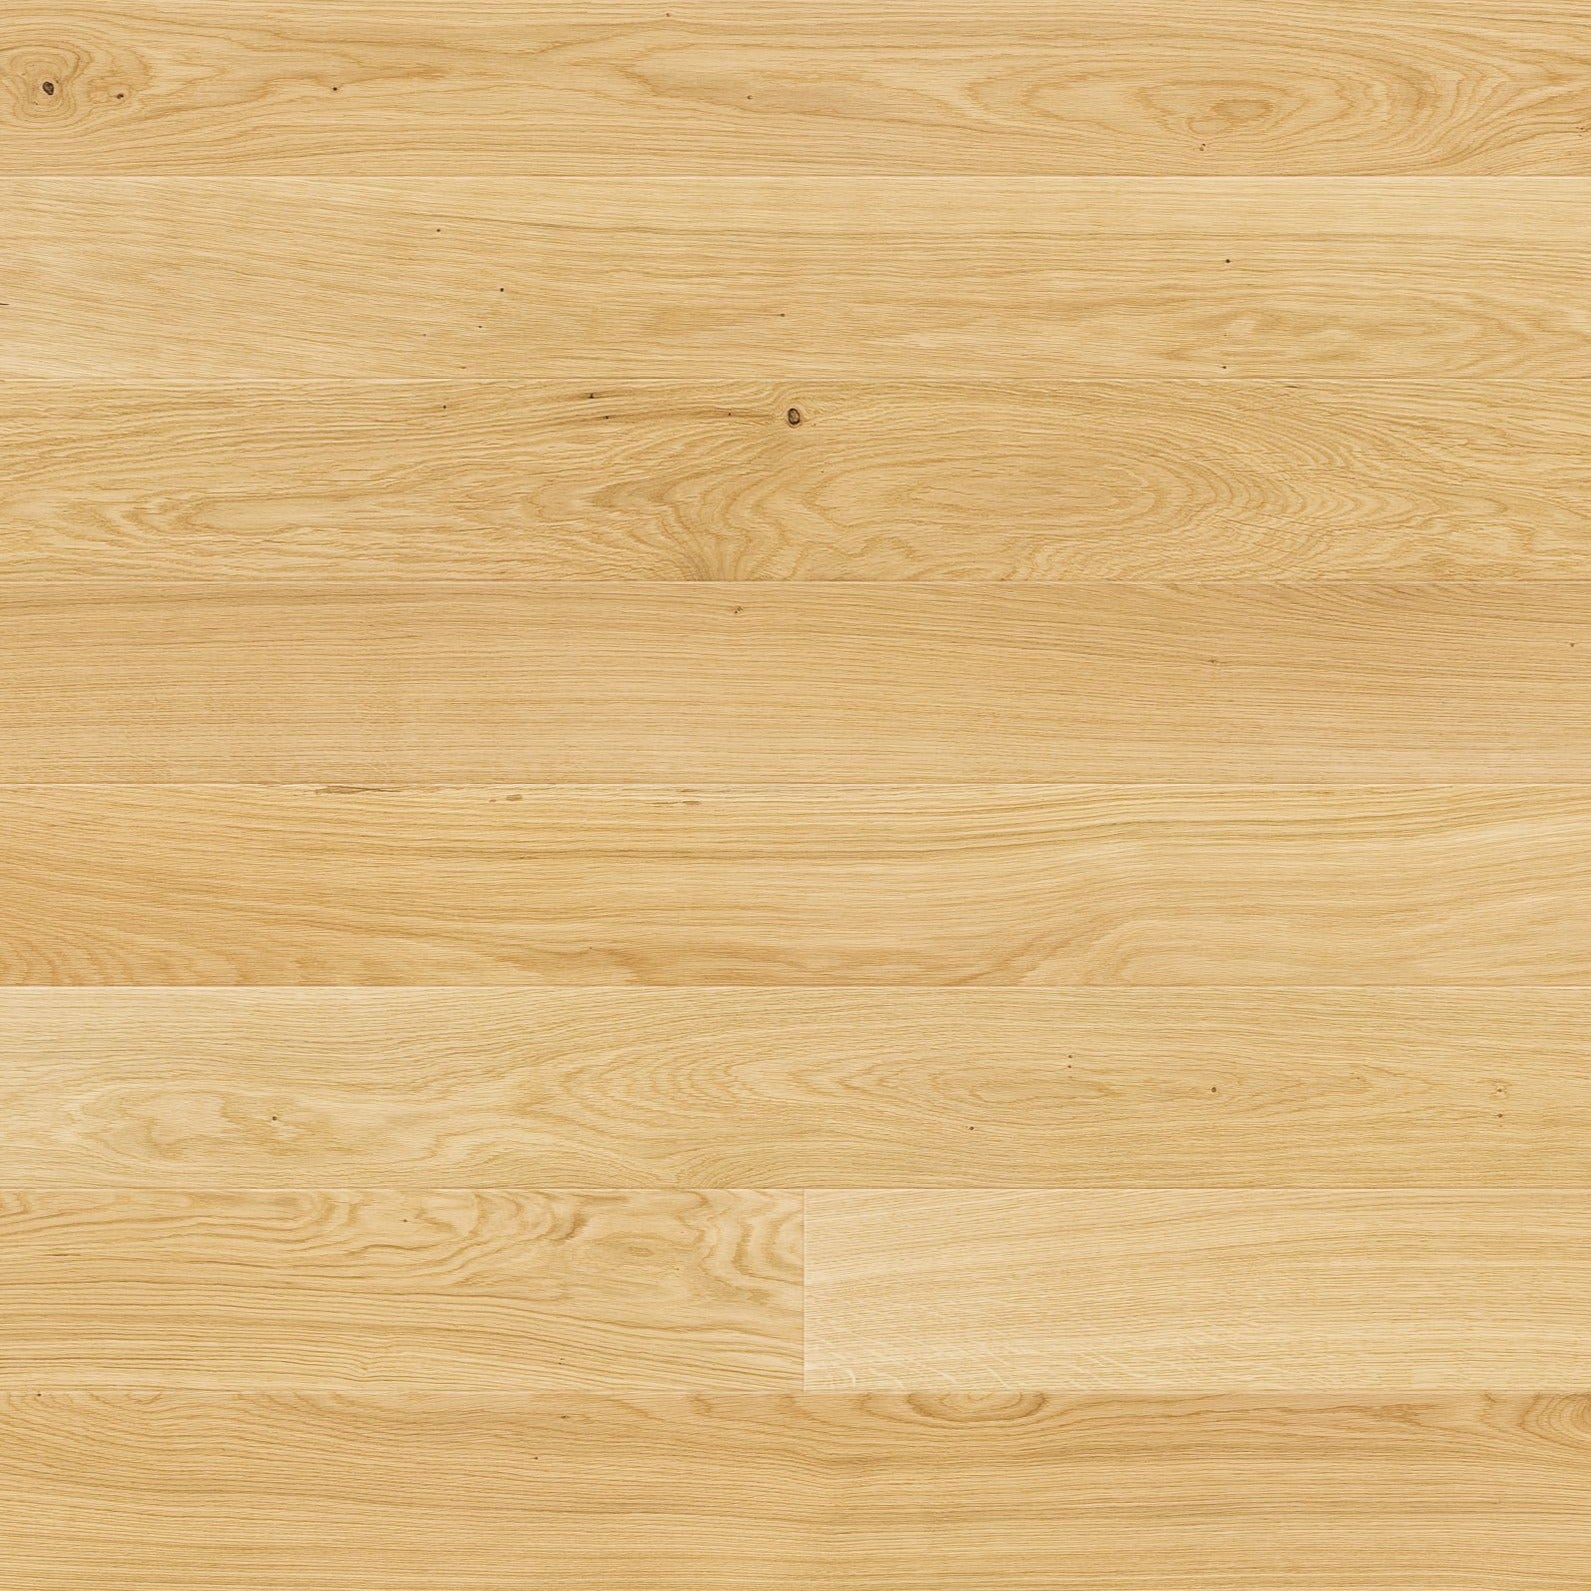 Engineered wood flooring in natural colour (5467712553117)